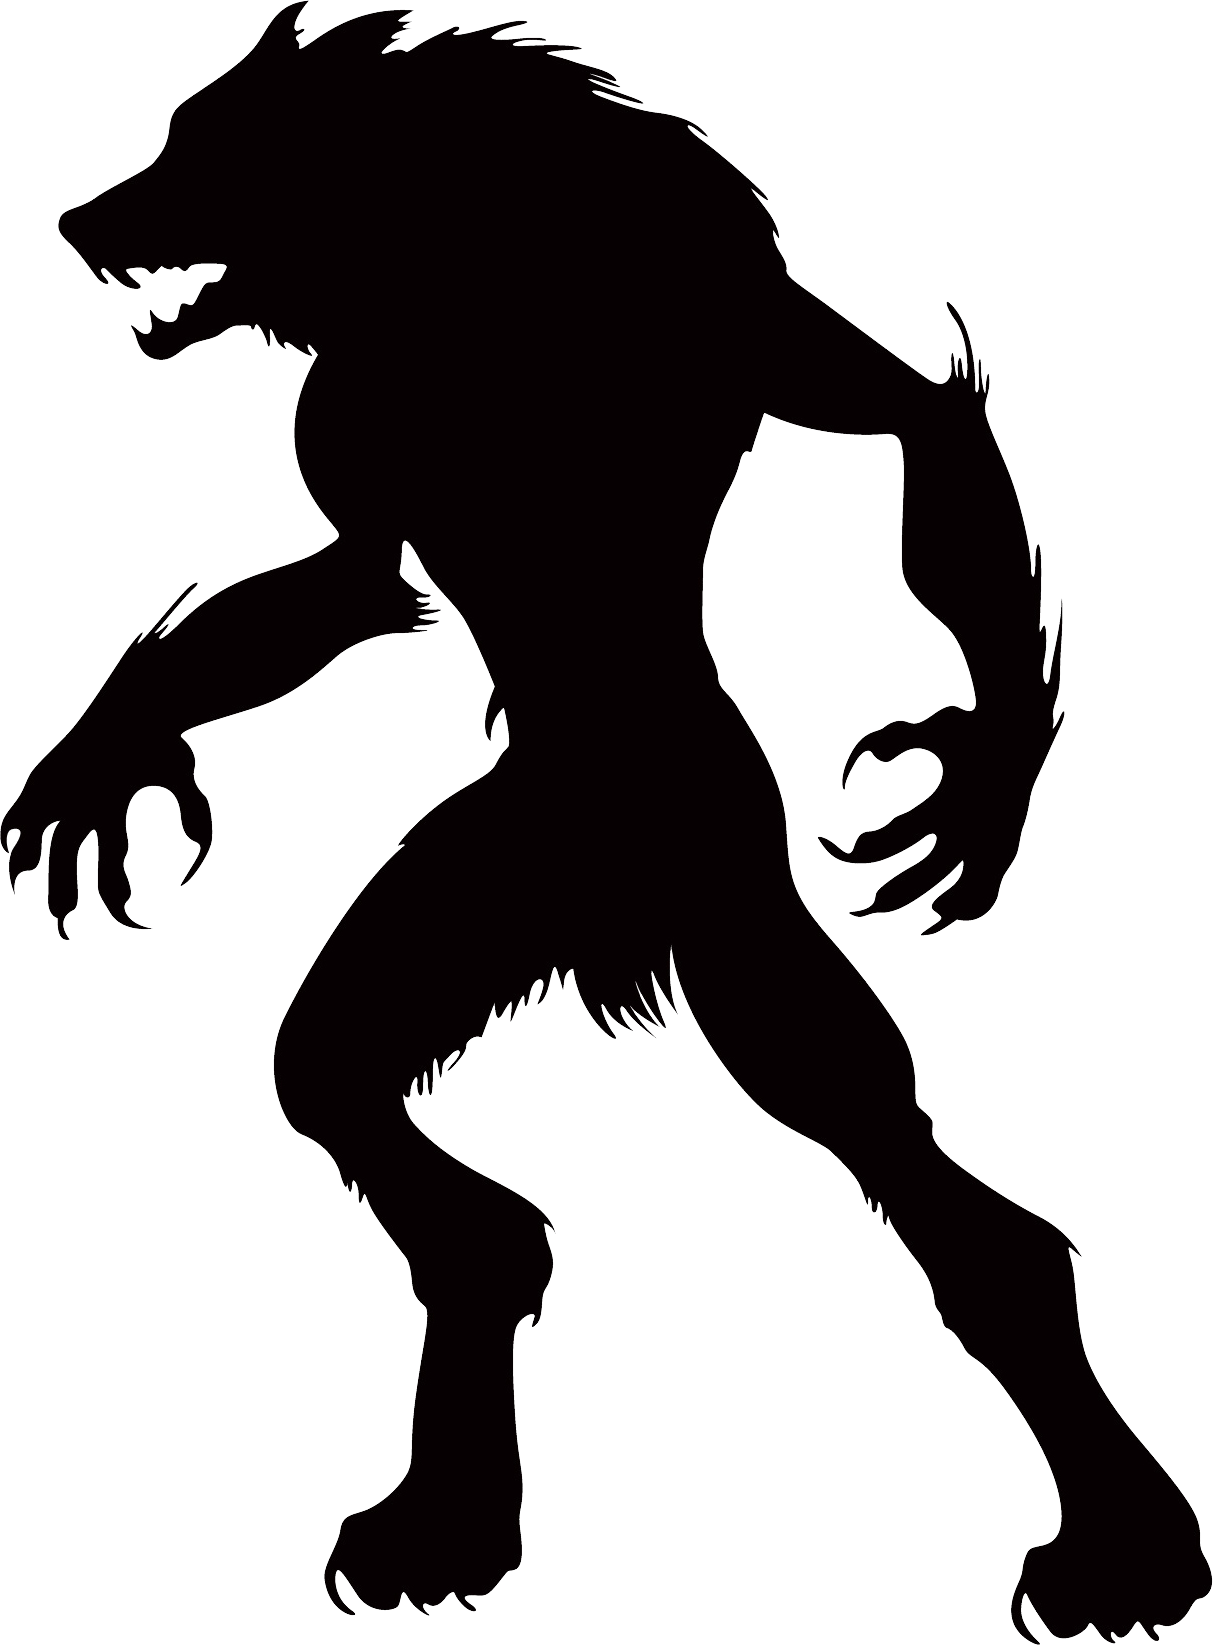 Werewolf Silhouette Graphic PNG